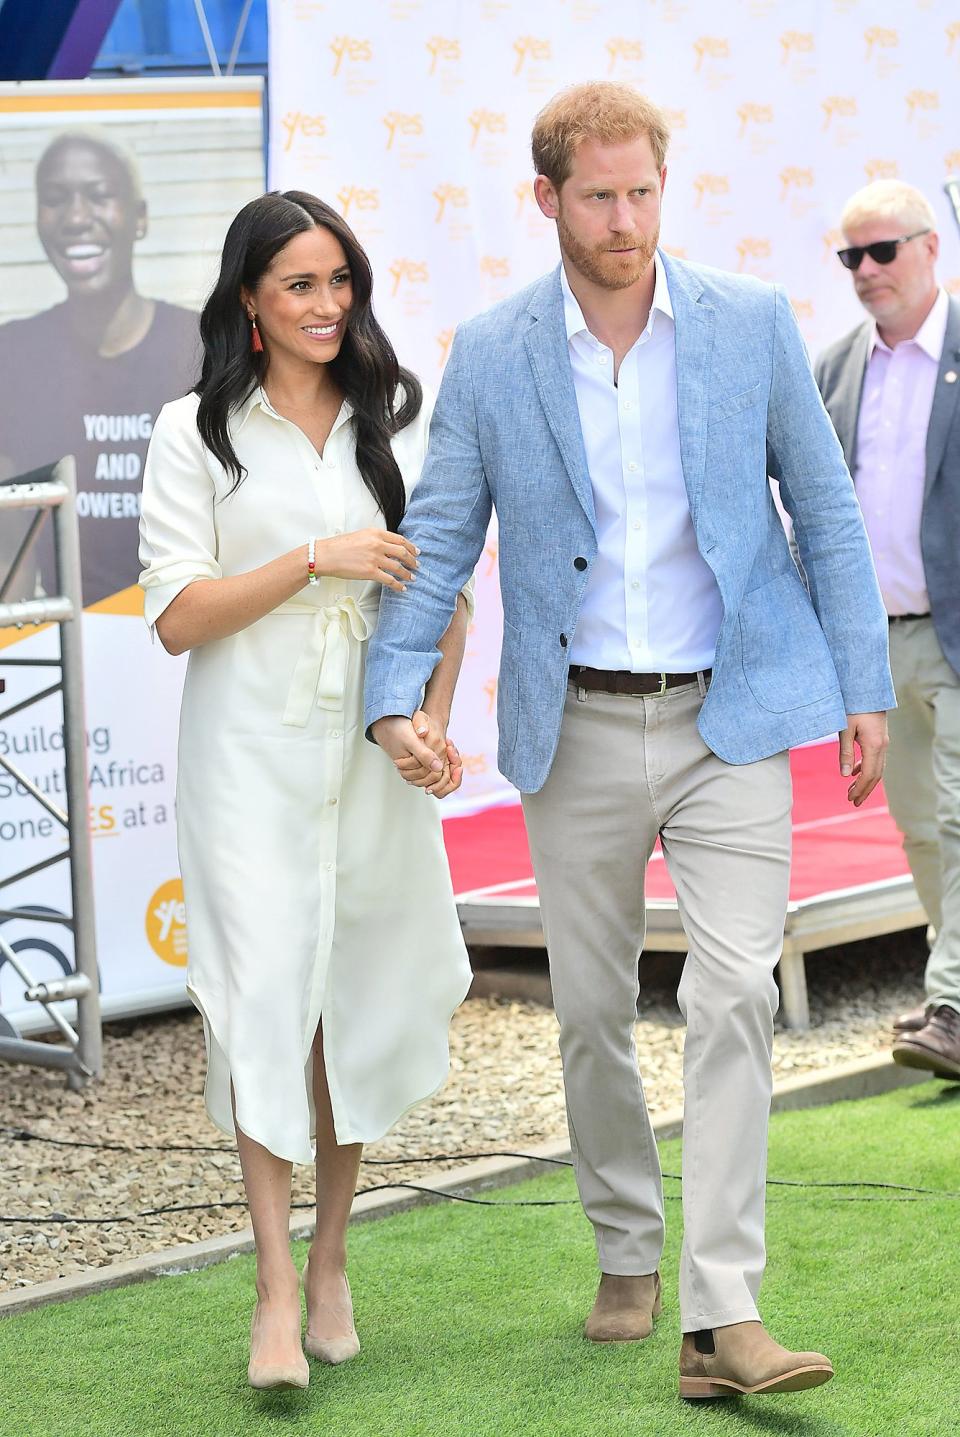 This Trip Follows in the Footsteps of Prince Harry & Meghan Markle’s Royal Tour of South Africa